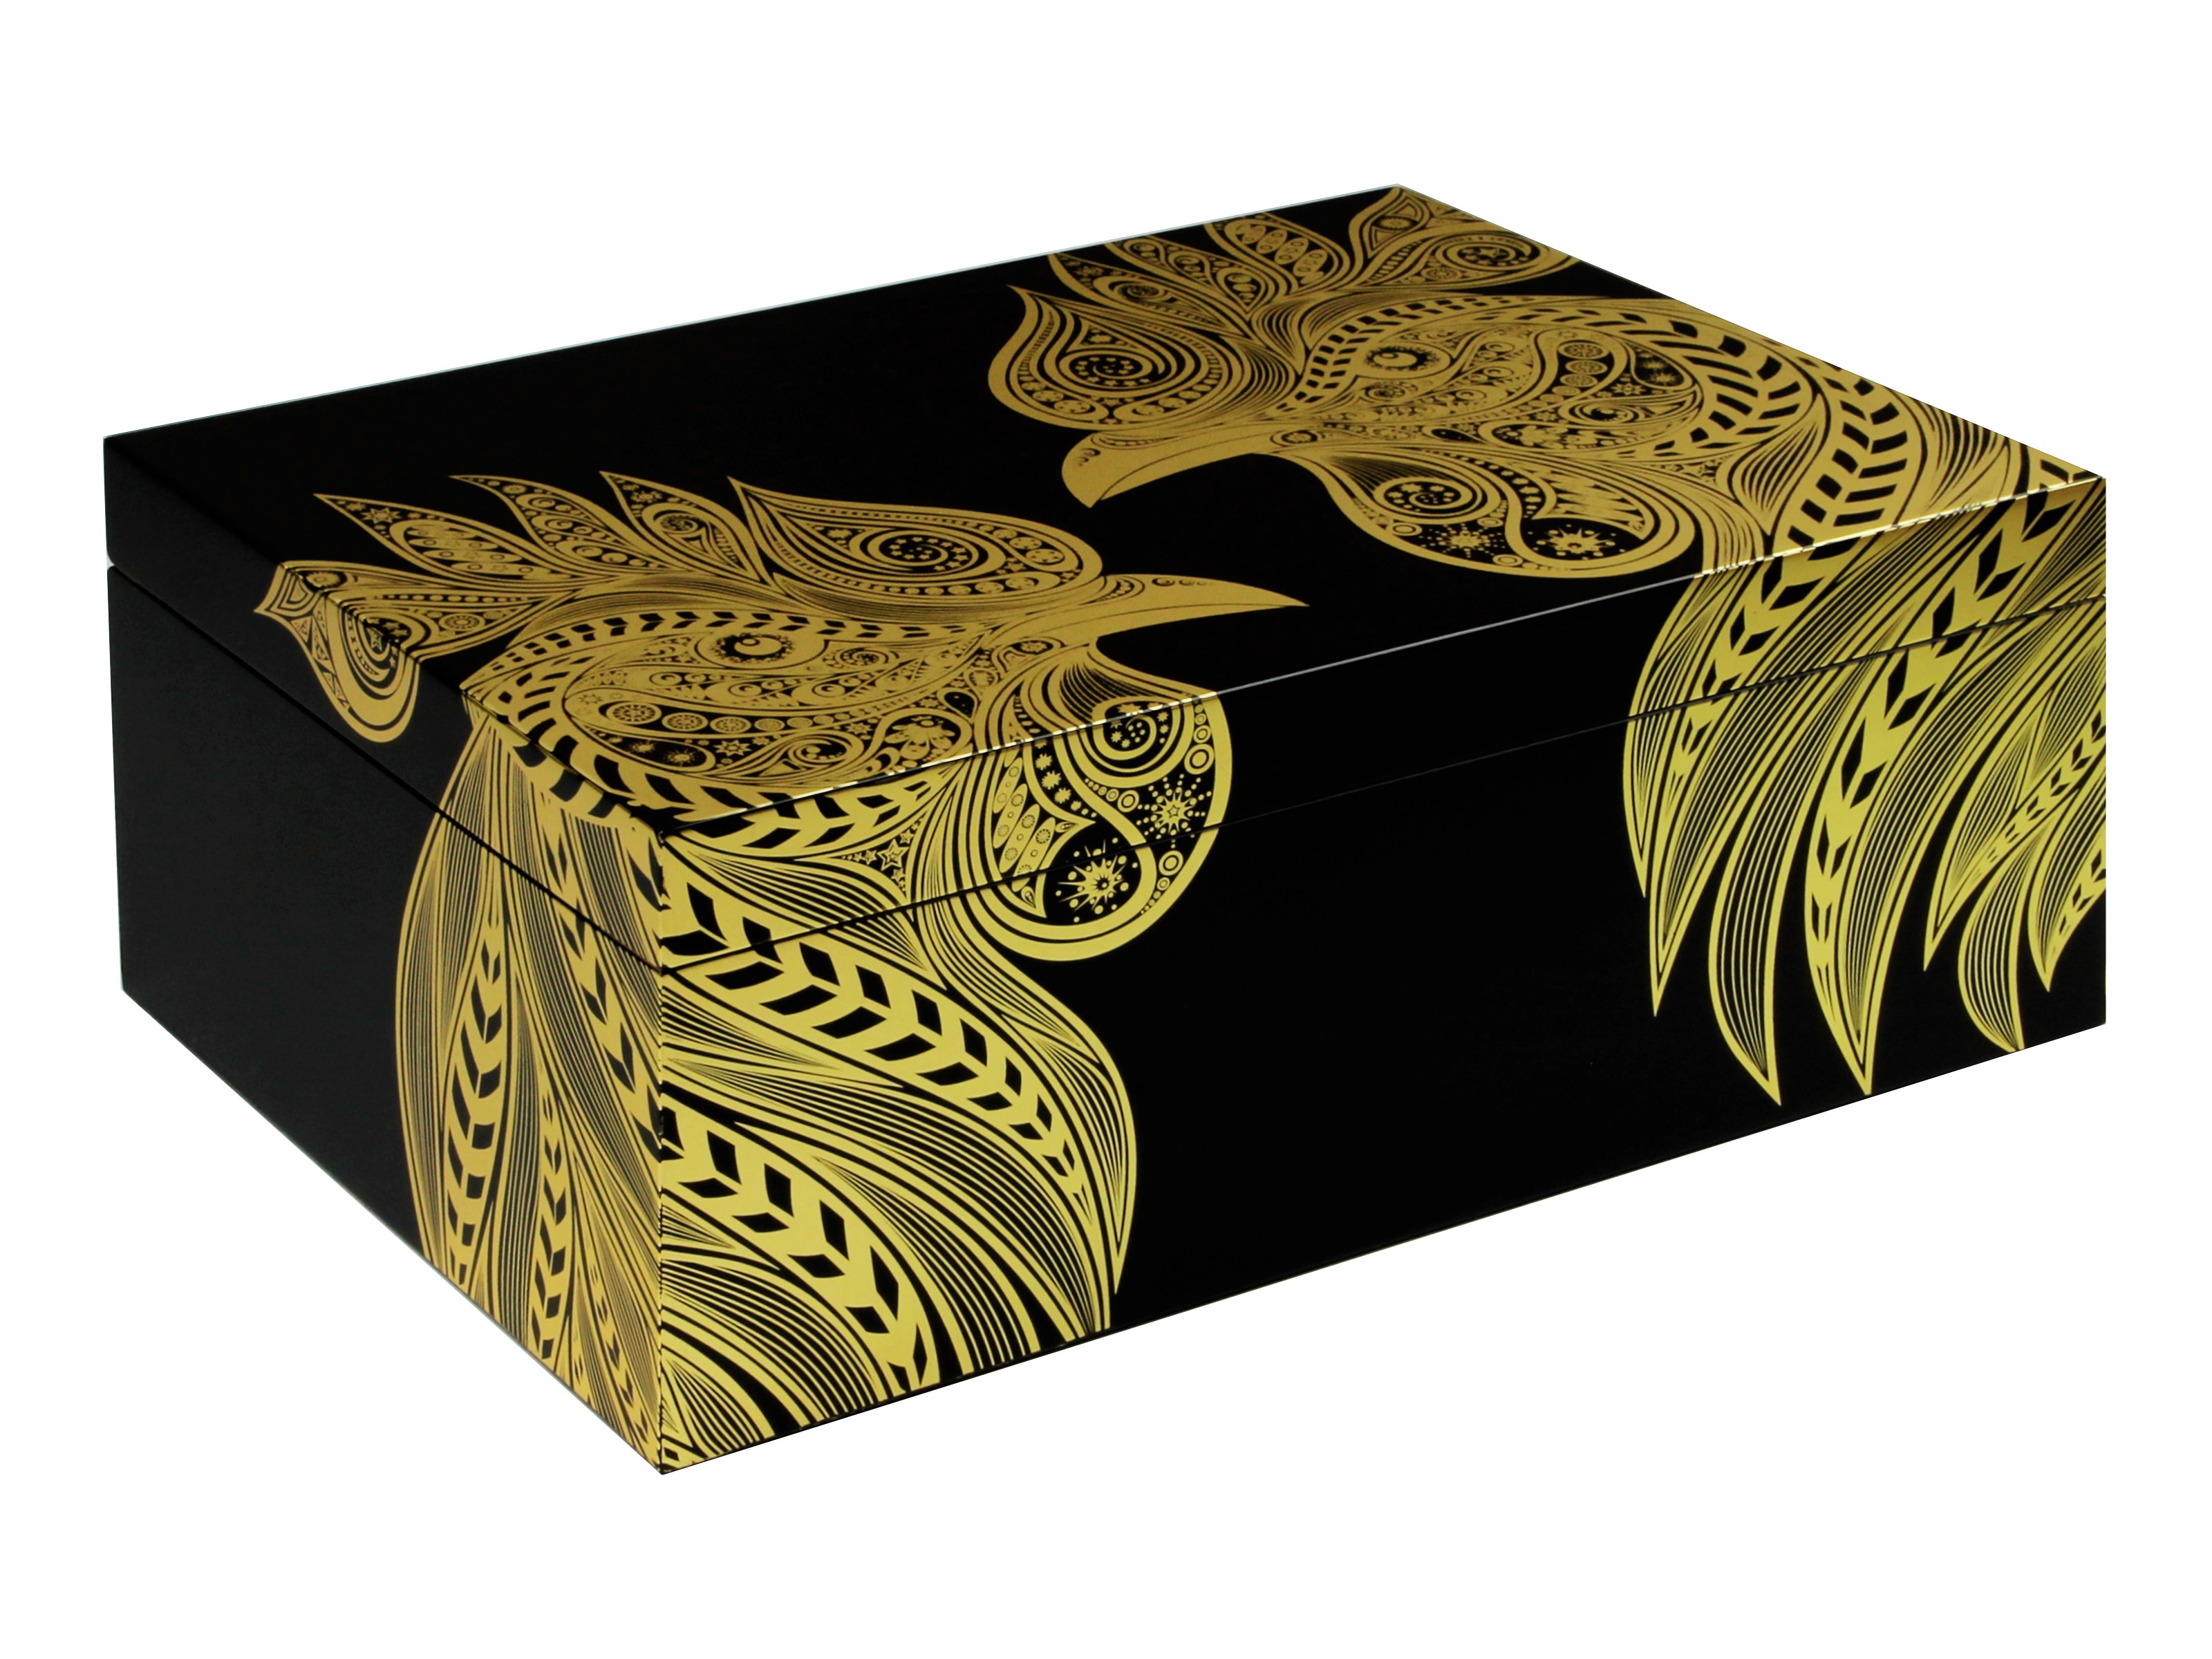 Adorini Limited Edition 2017 Year of the Rooster Humidor - 150 Capacity